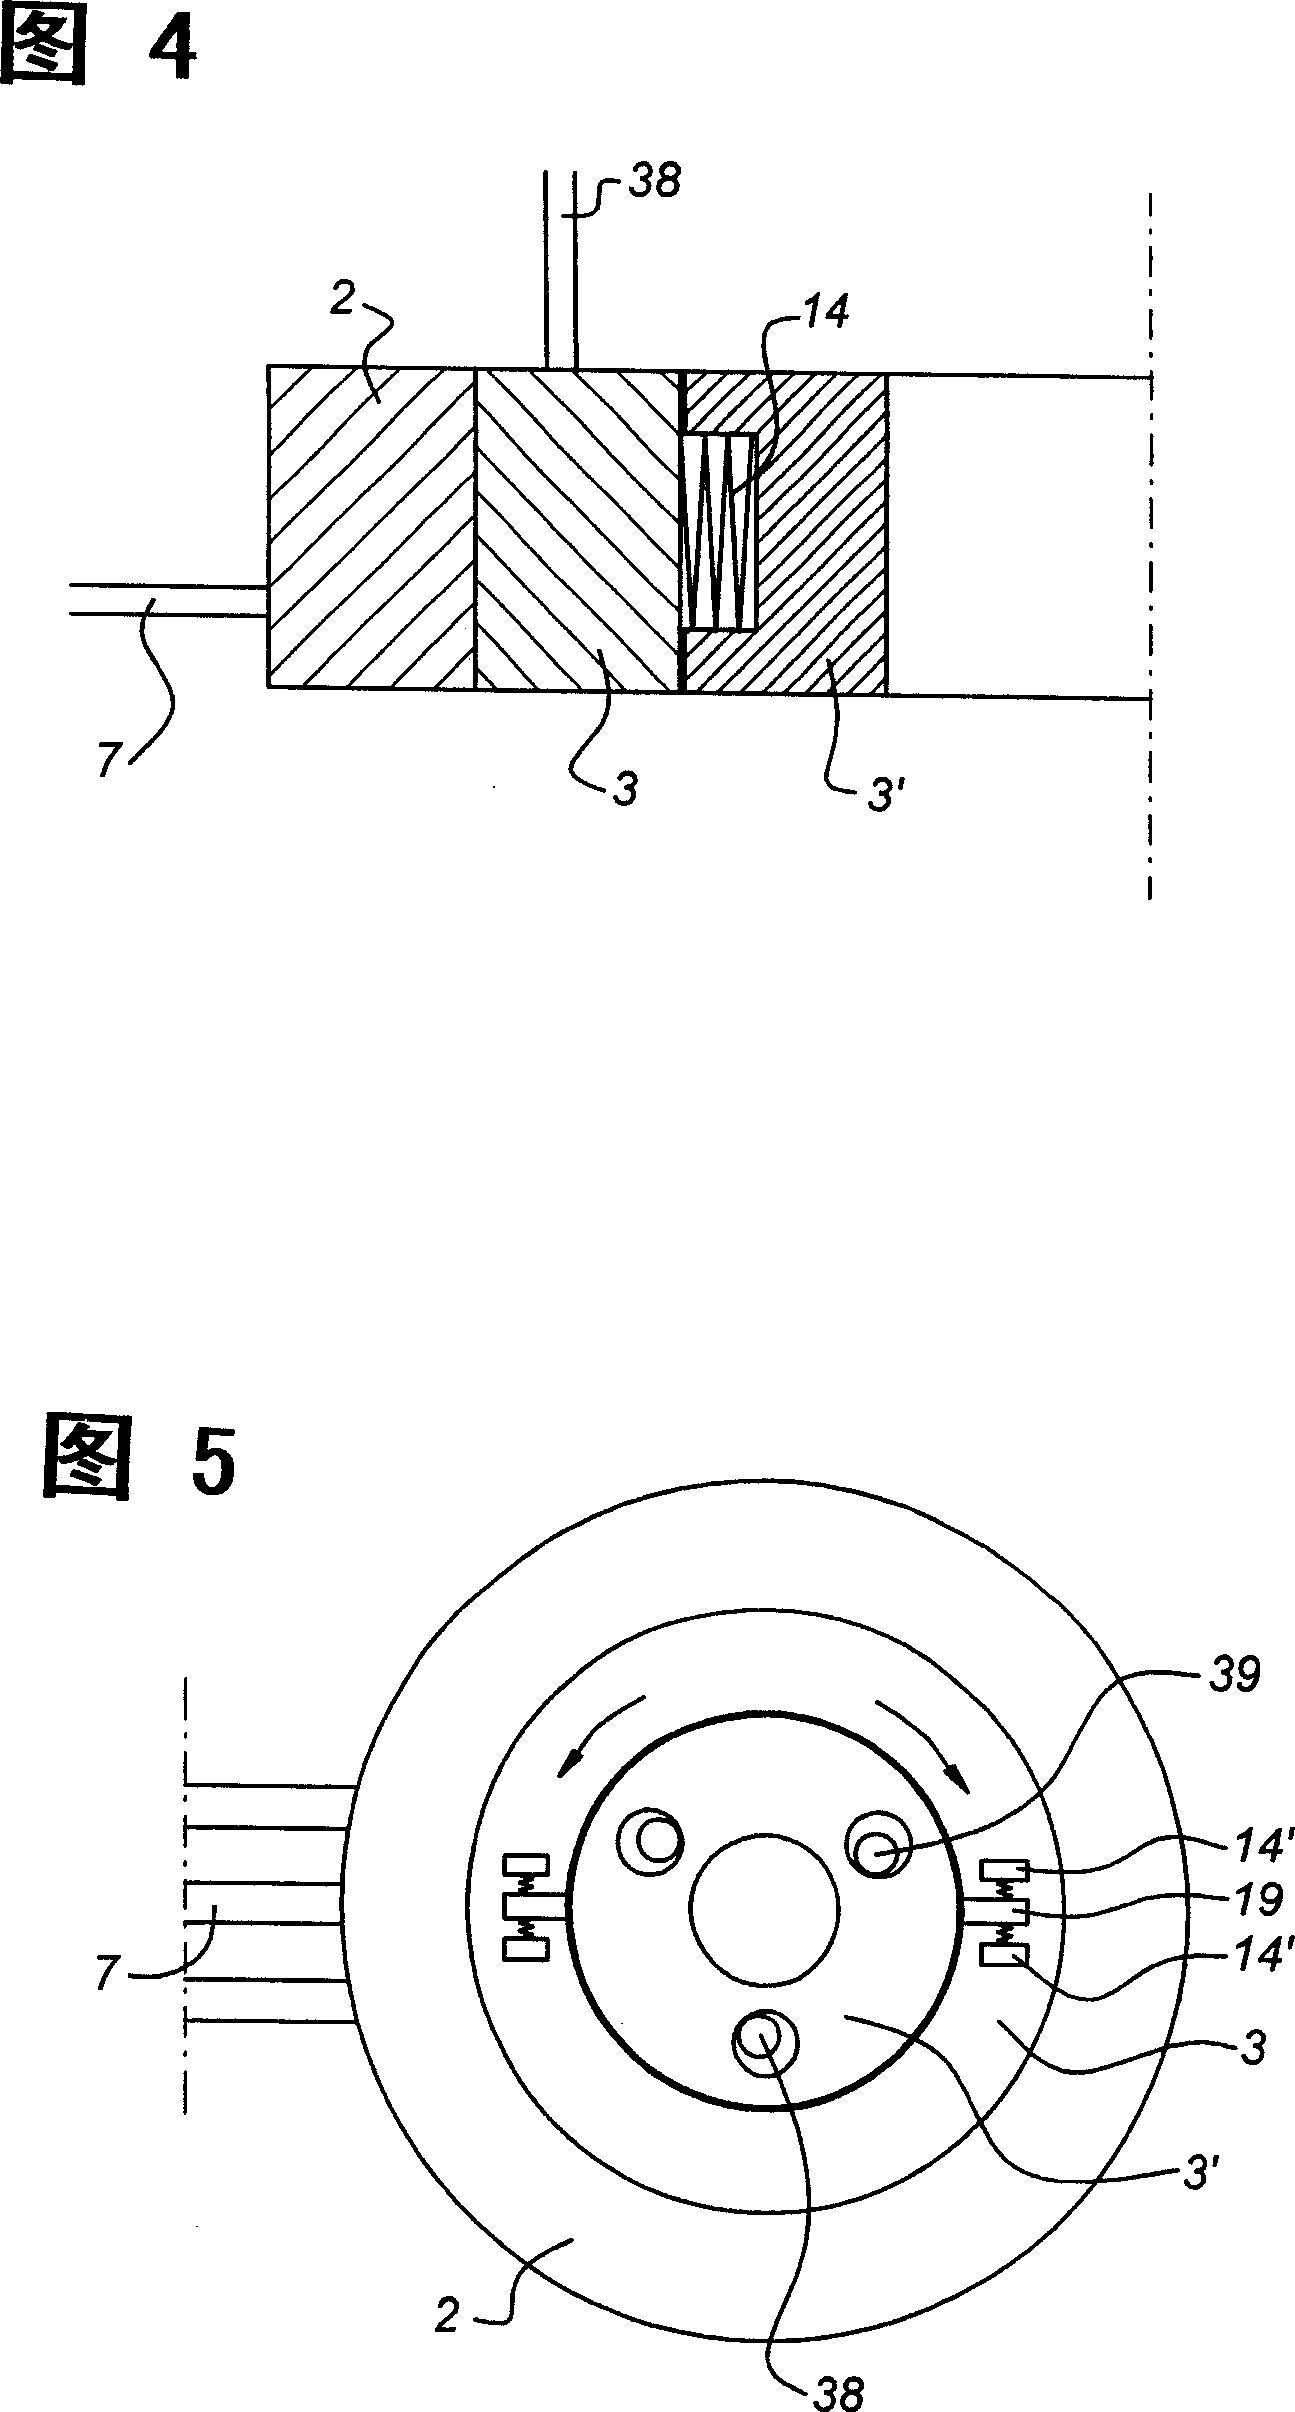 High pressure or middle pressure rotating connector